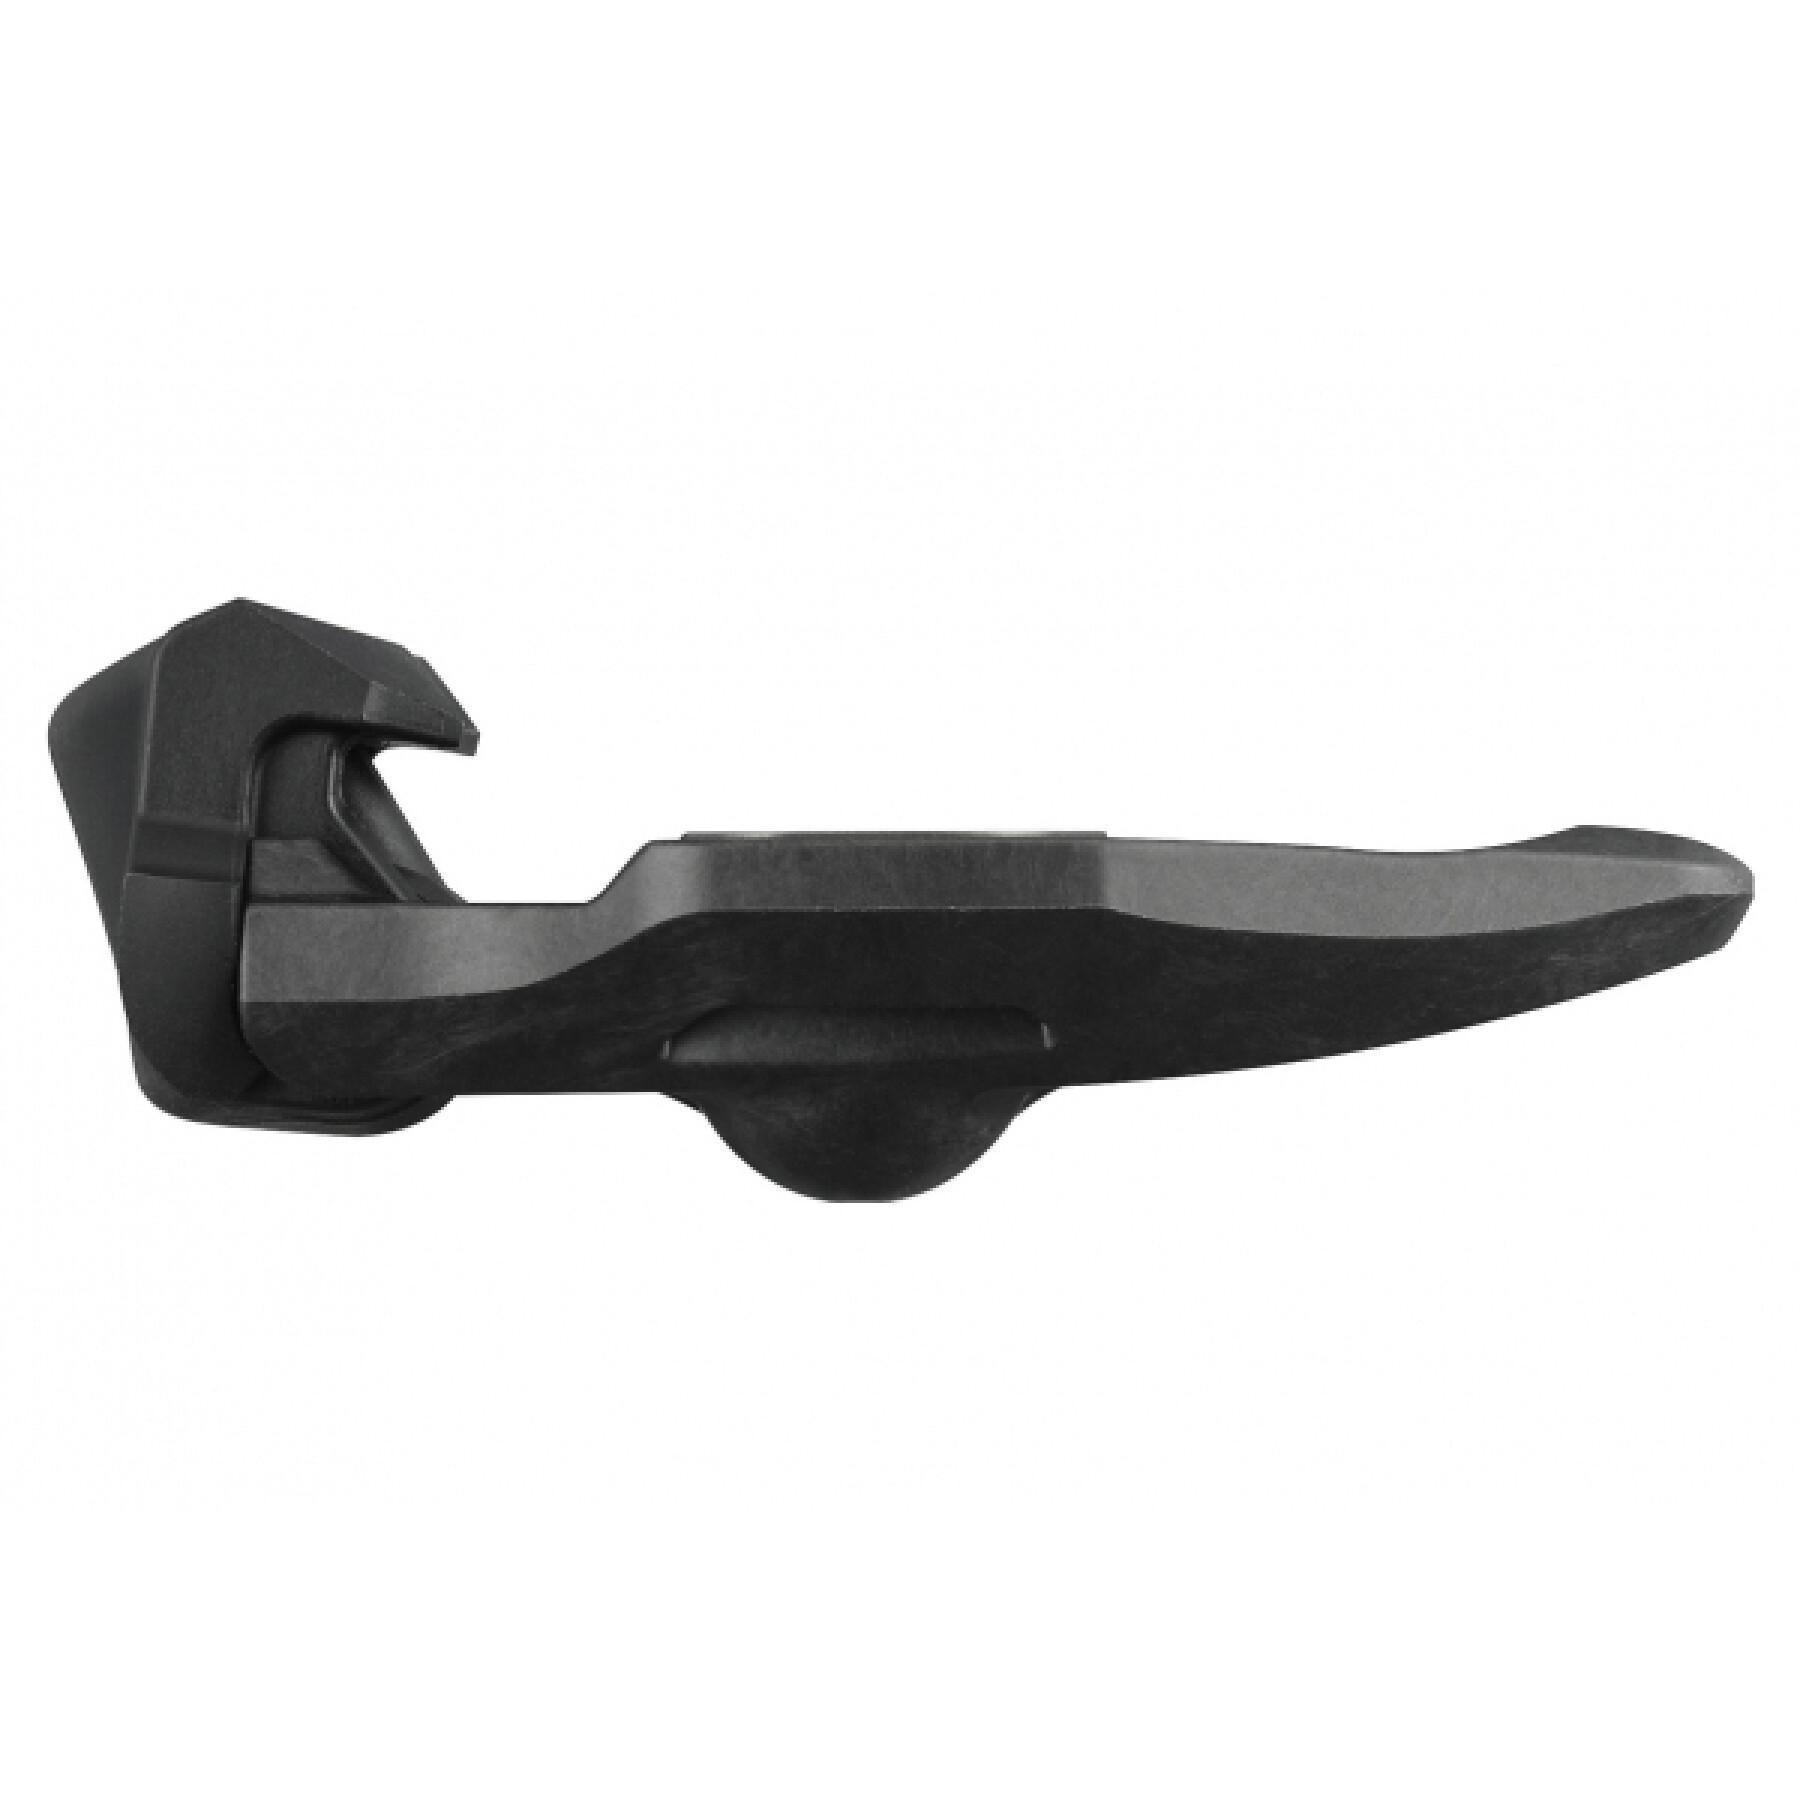 Single-sided road pedals Shimano SPD SL PD-R8000